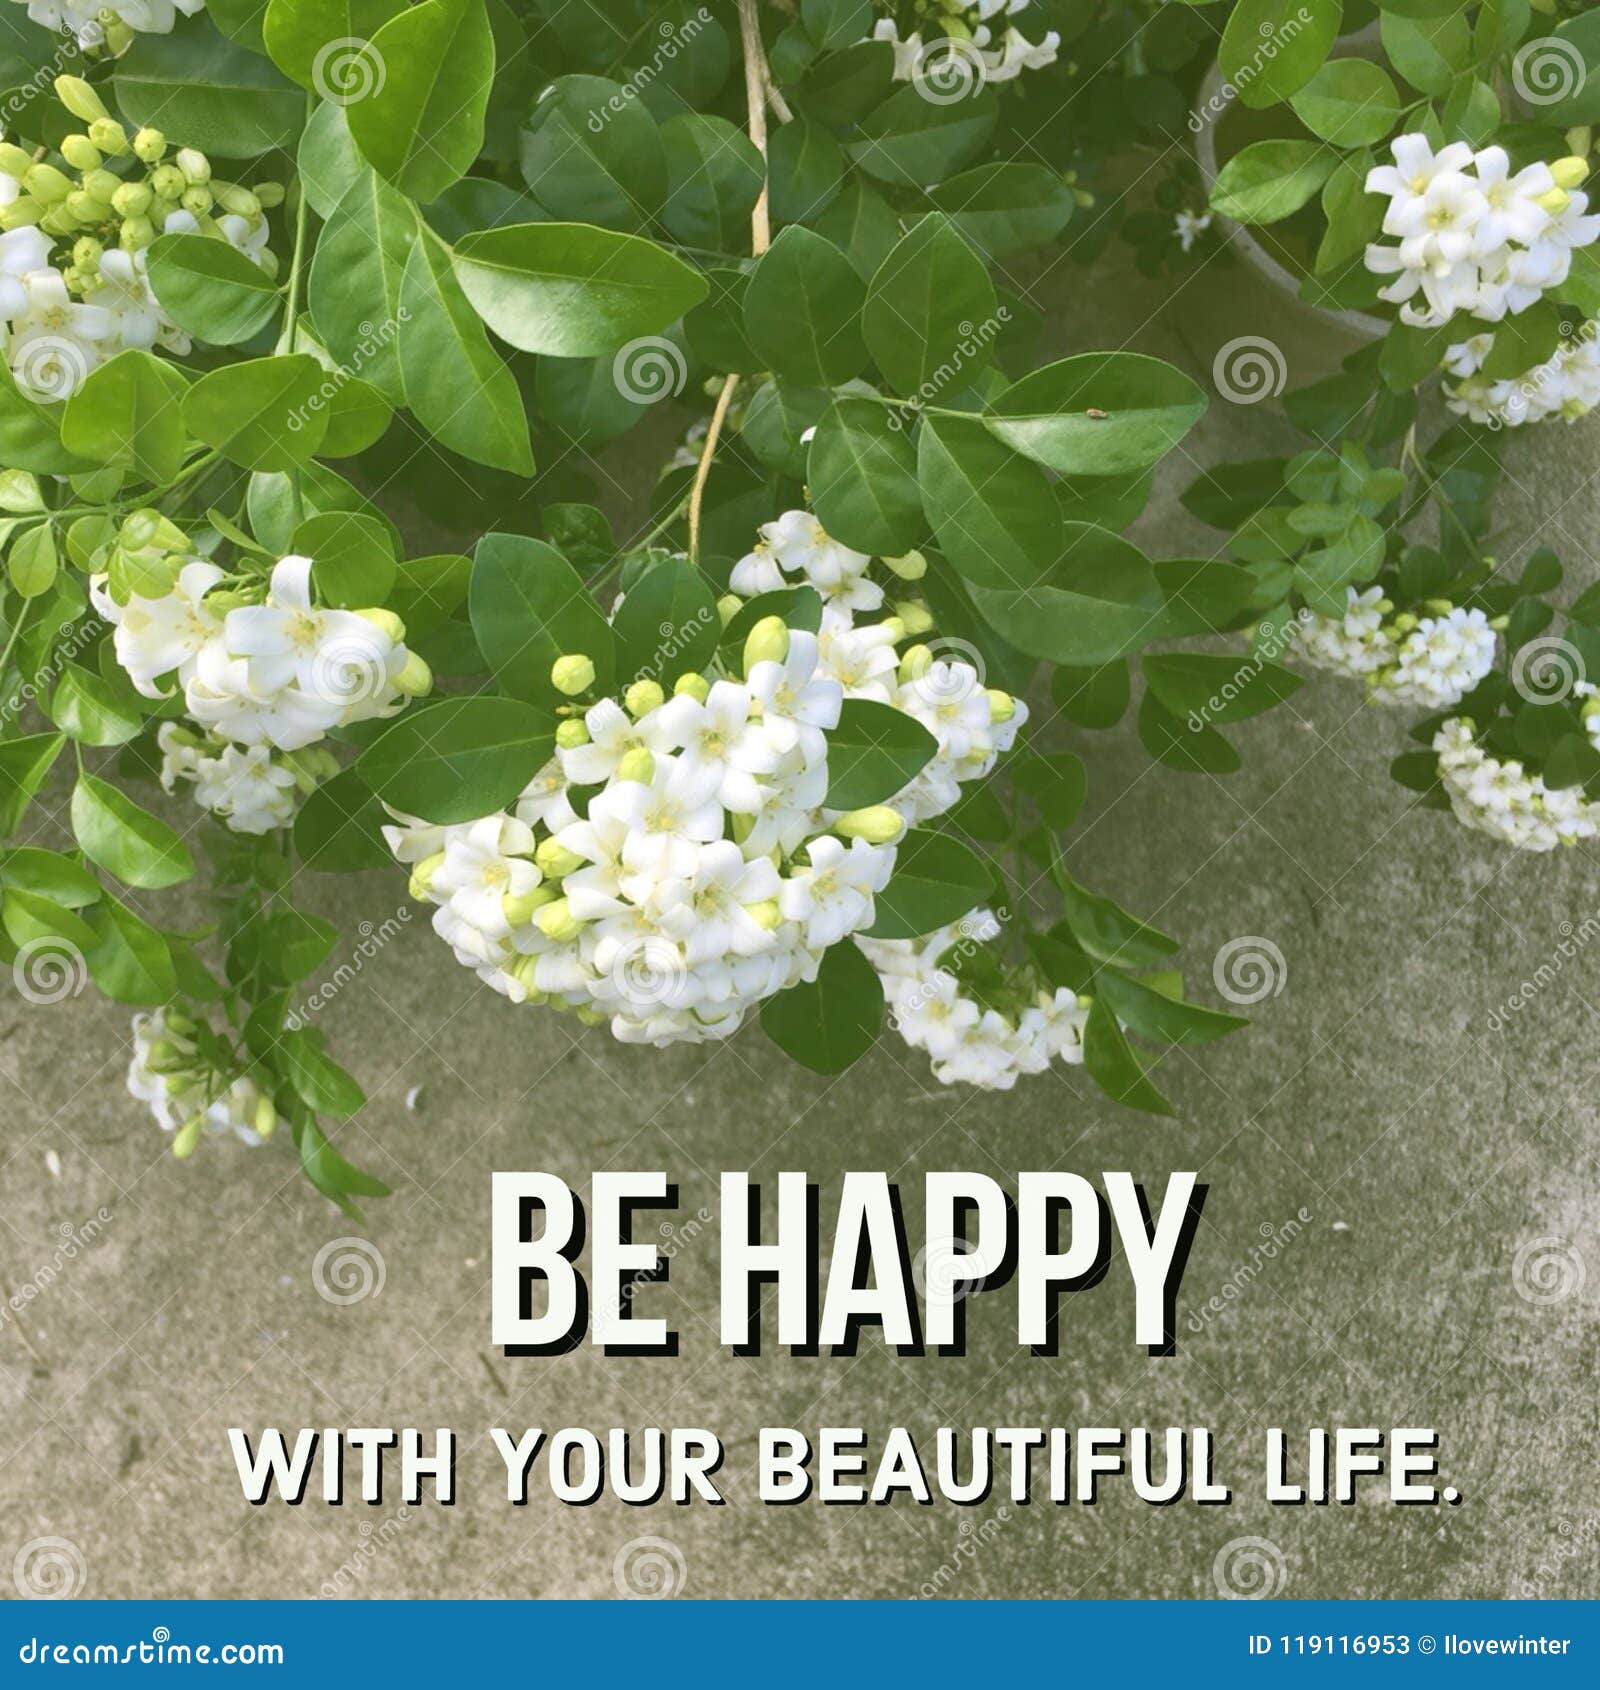 Inspirational Motivational Quote Be Happy With Your Beautiful Life Stock Image Image Of Branch Inspiration